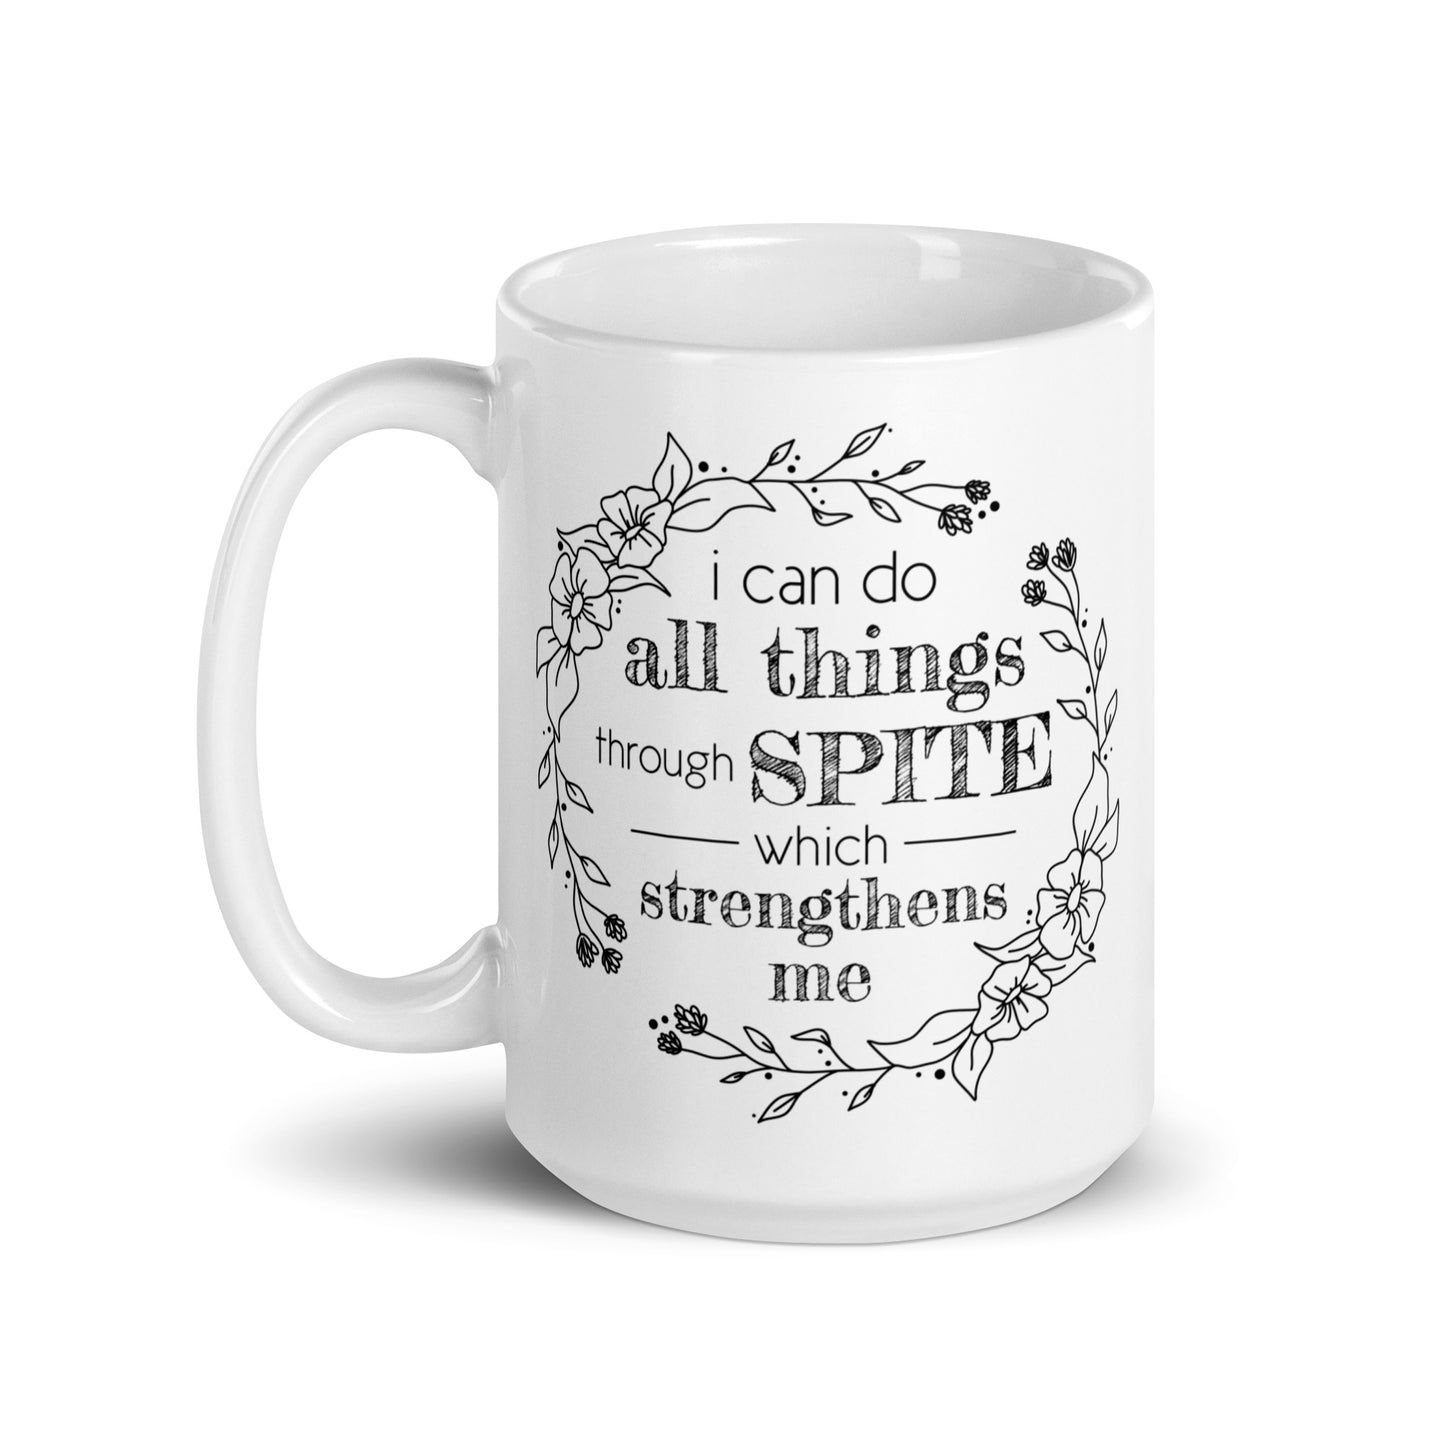 A white ceramic mug featuring a simple illustration of a floral wreath. Inside the wreath is text that reads "I can do all things through SPITE which motivates me"